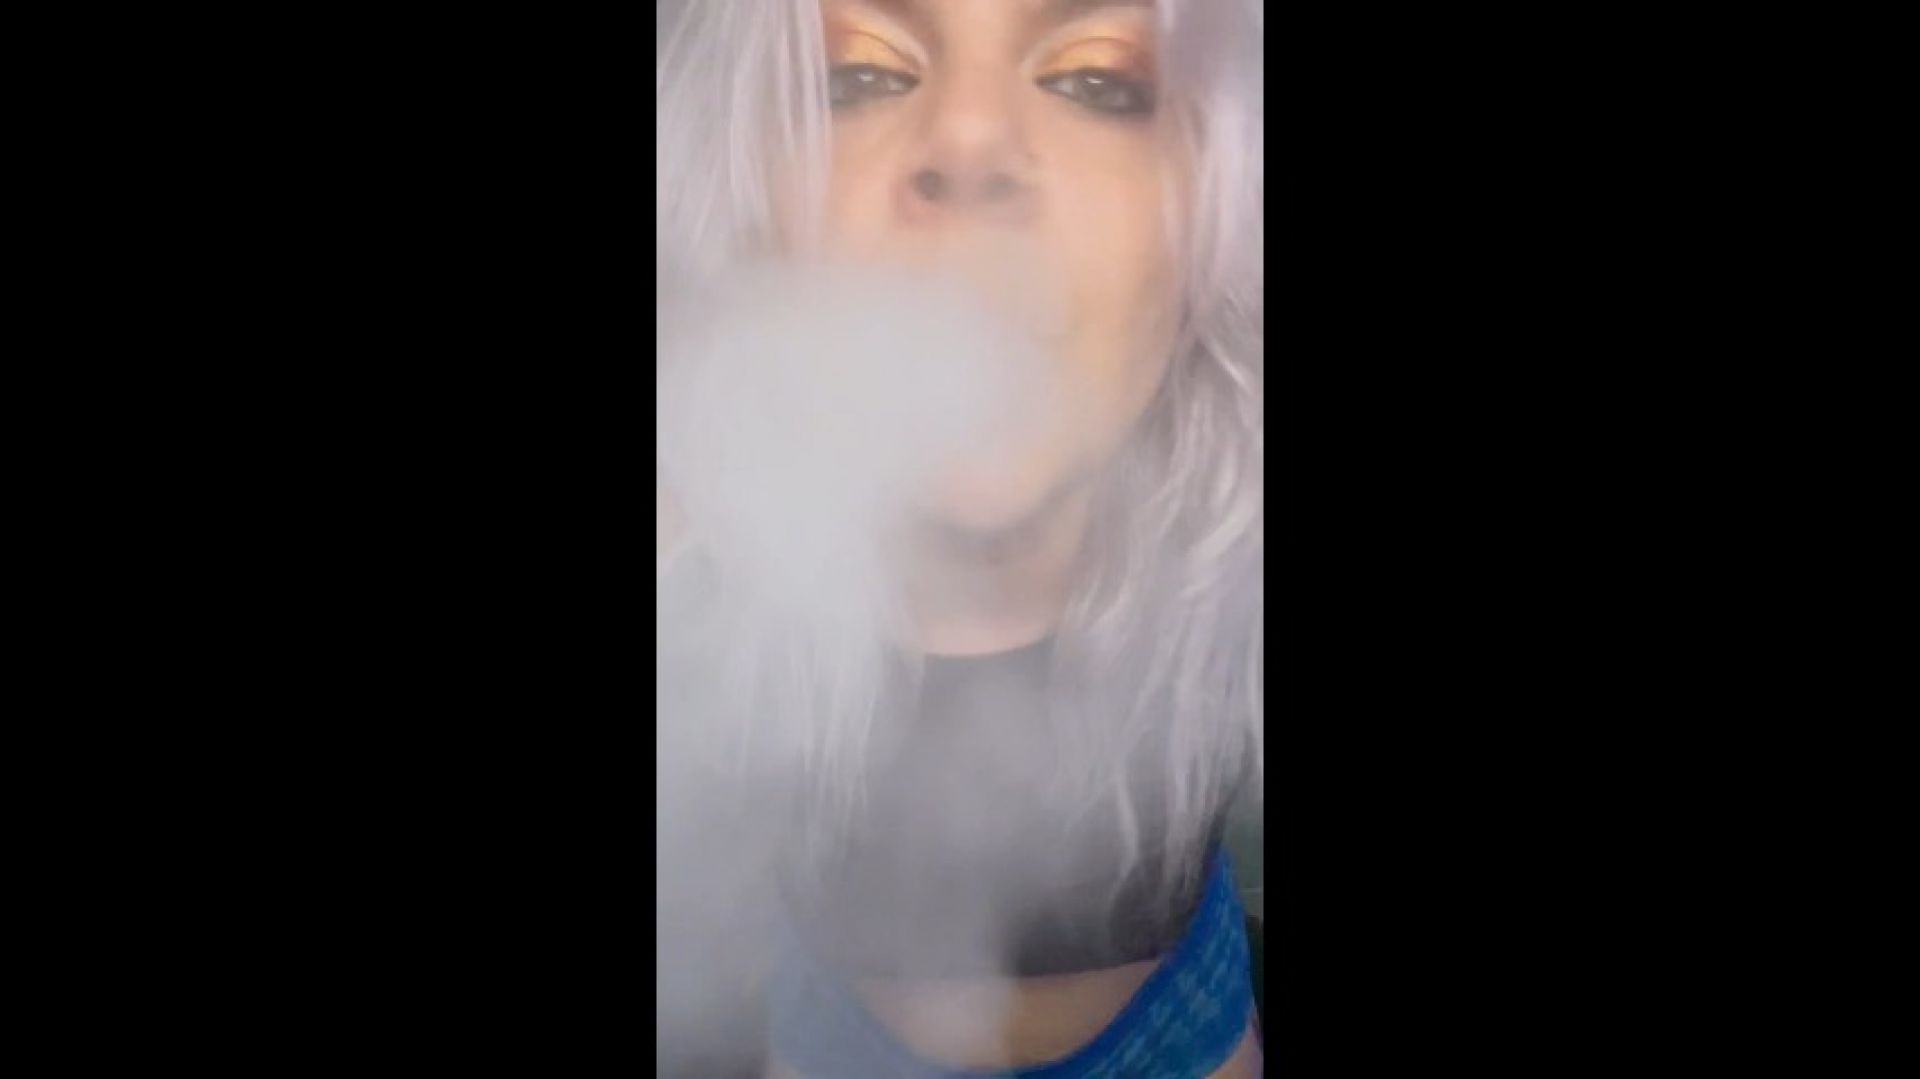 Vape and smoke with me while I blow clouds